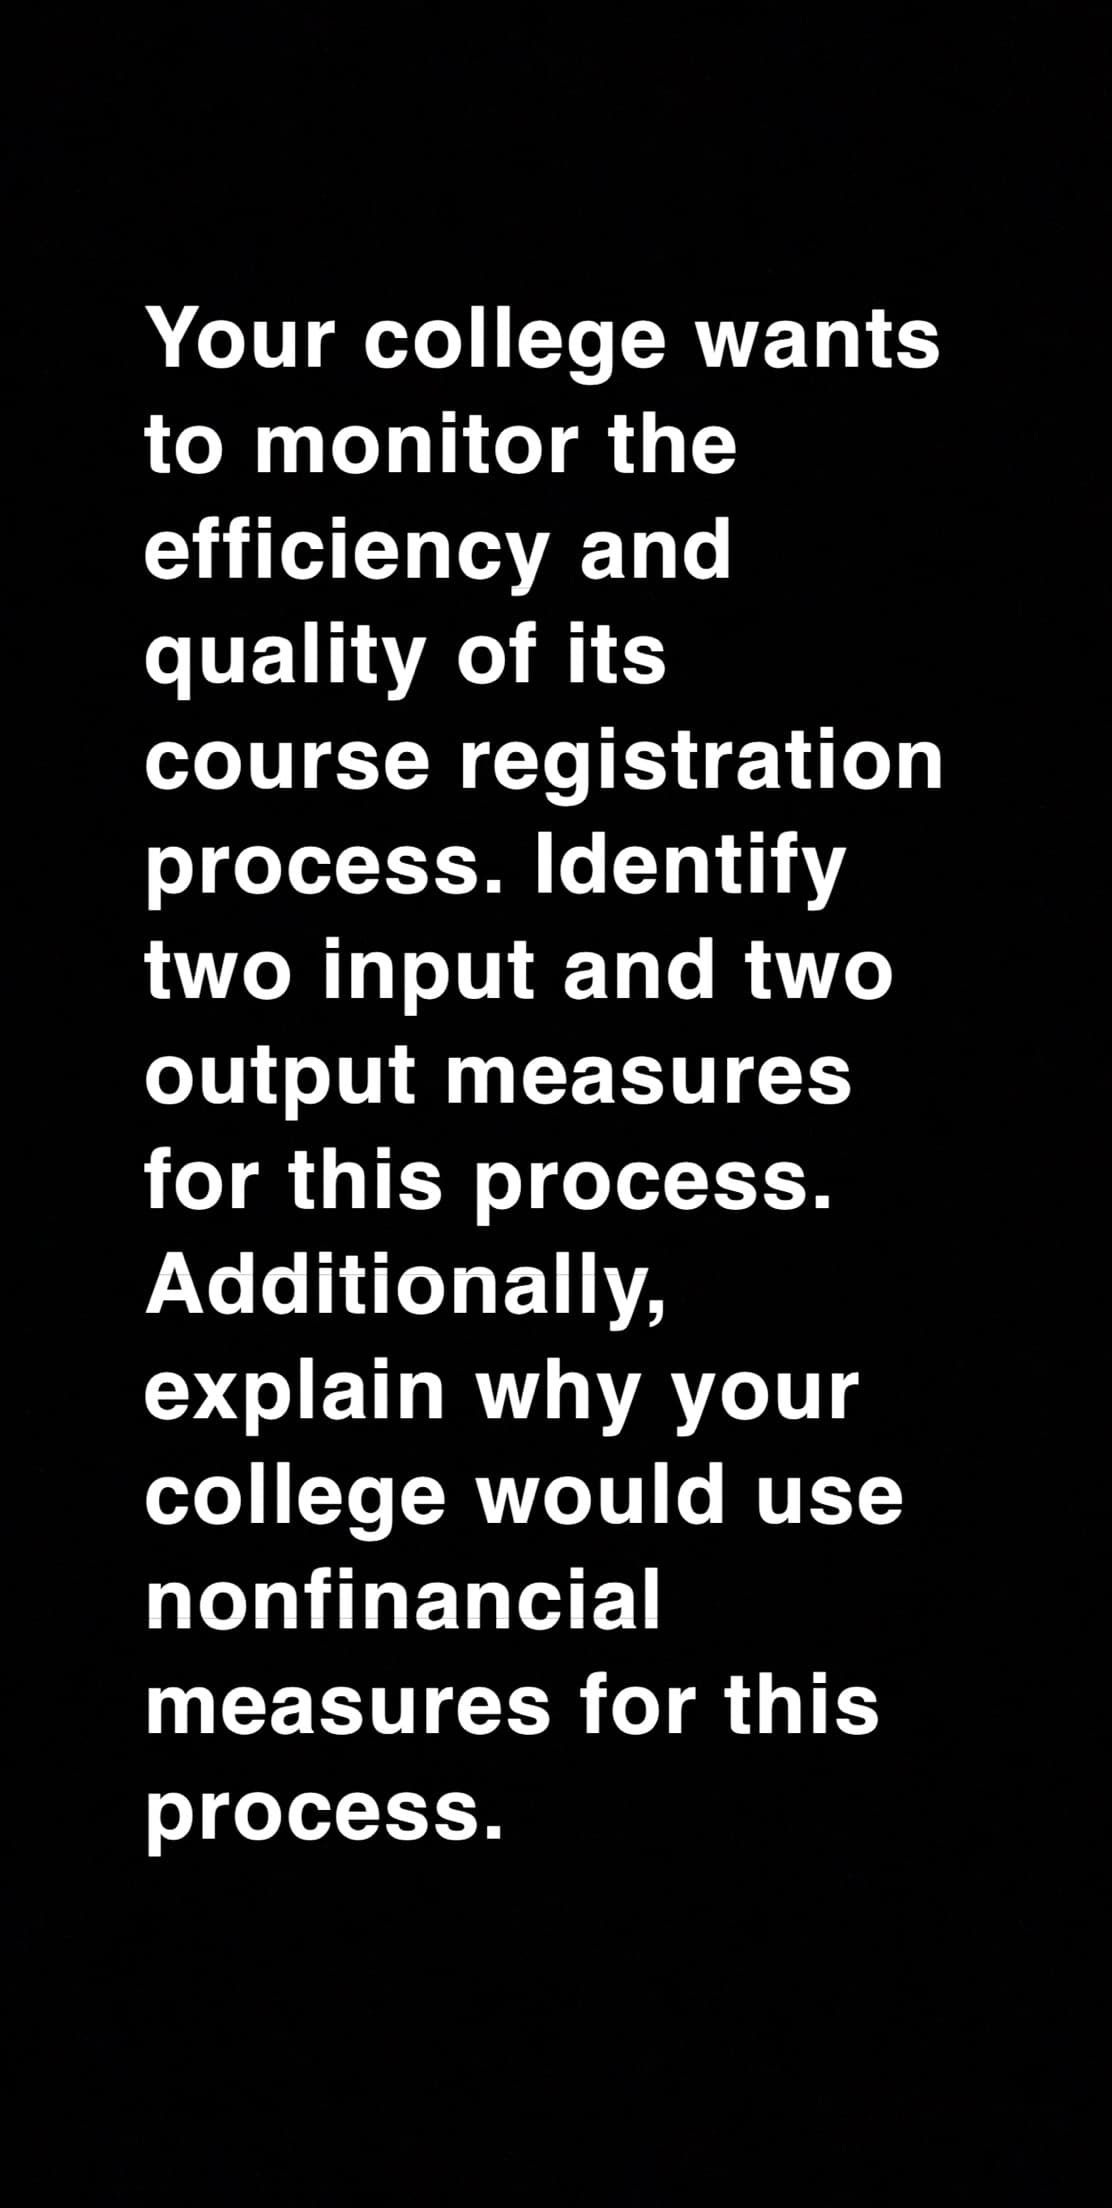 Your college wants
to monitor the
efficiency and
quality of its
course registration
process. Identify
two input and two
output measures
for this process.
Additionally,
explain why your
college would use
nonfinancial
measures for this
process.
